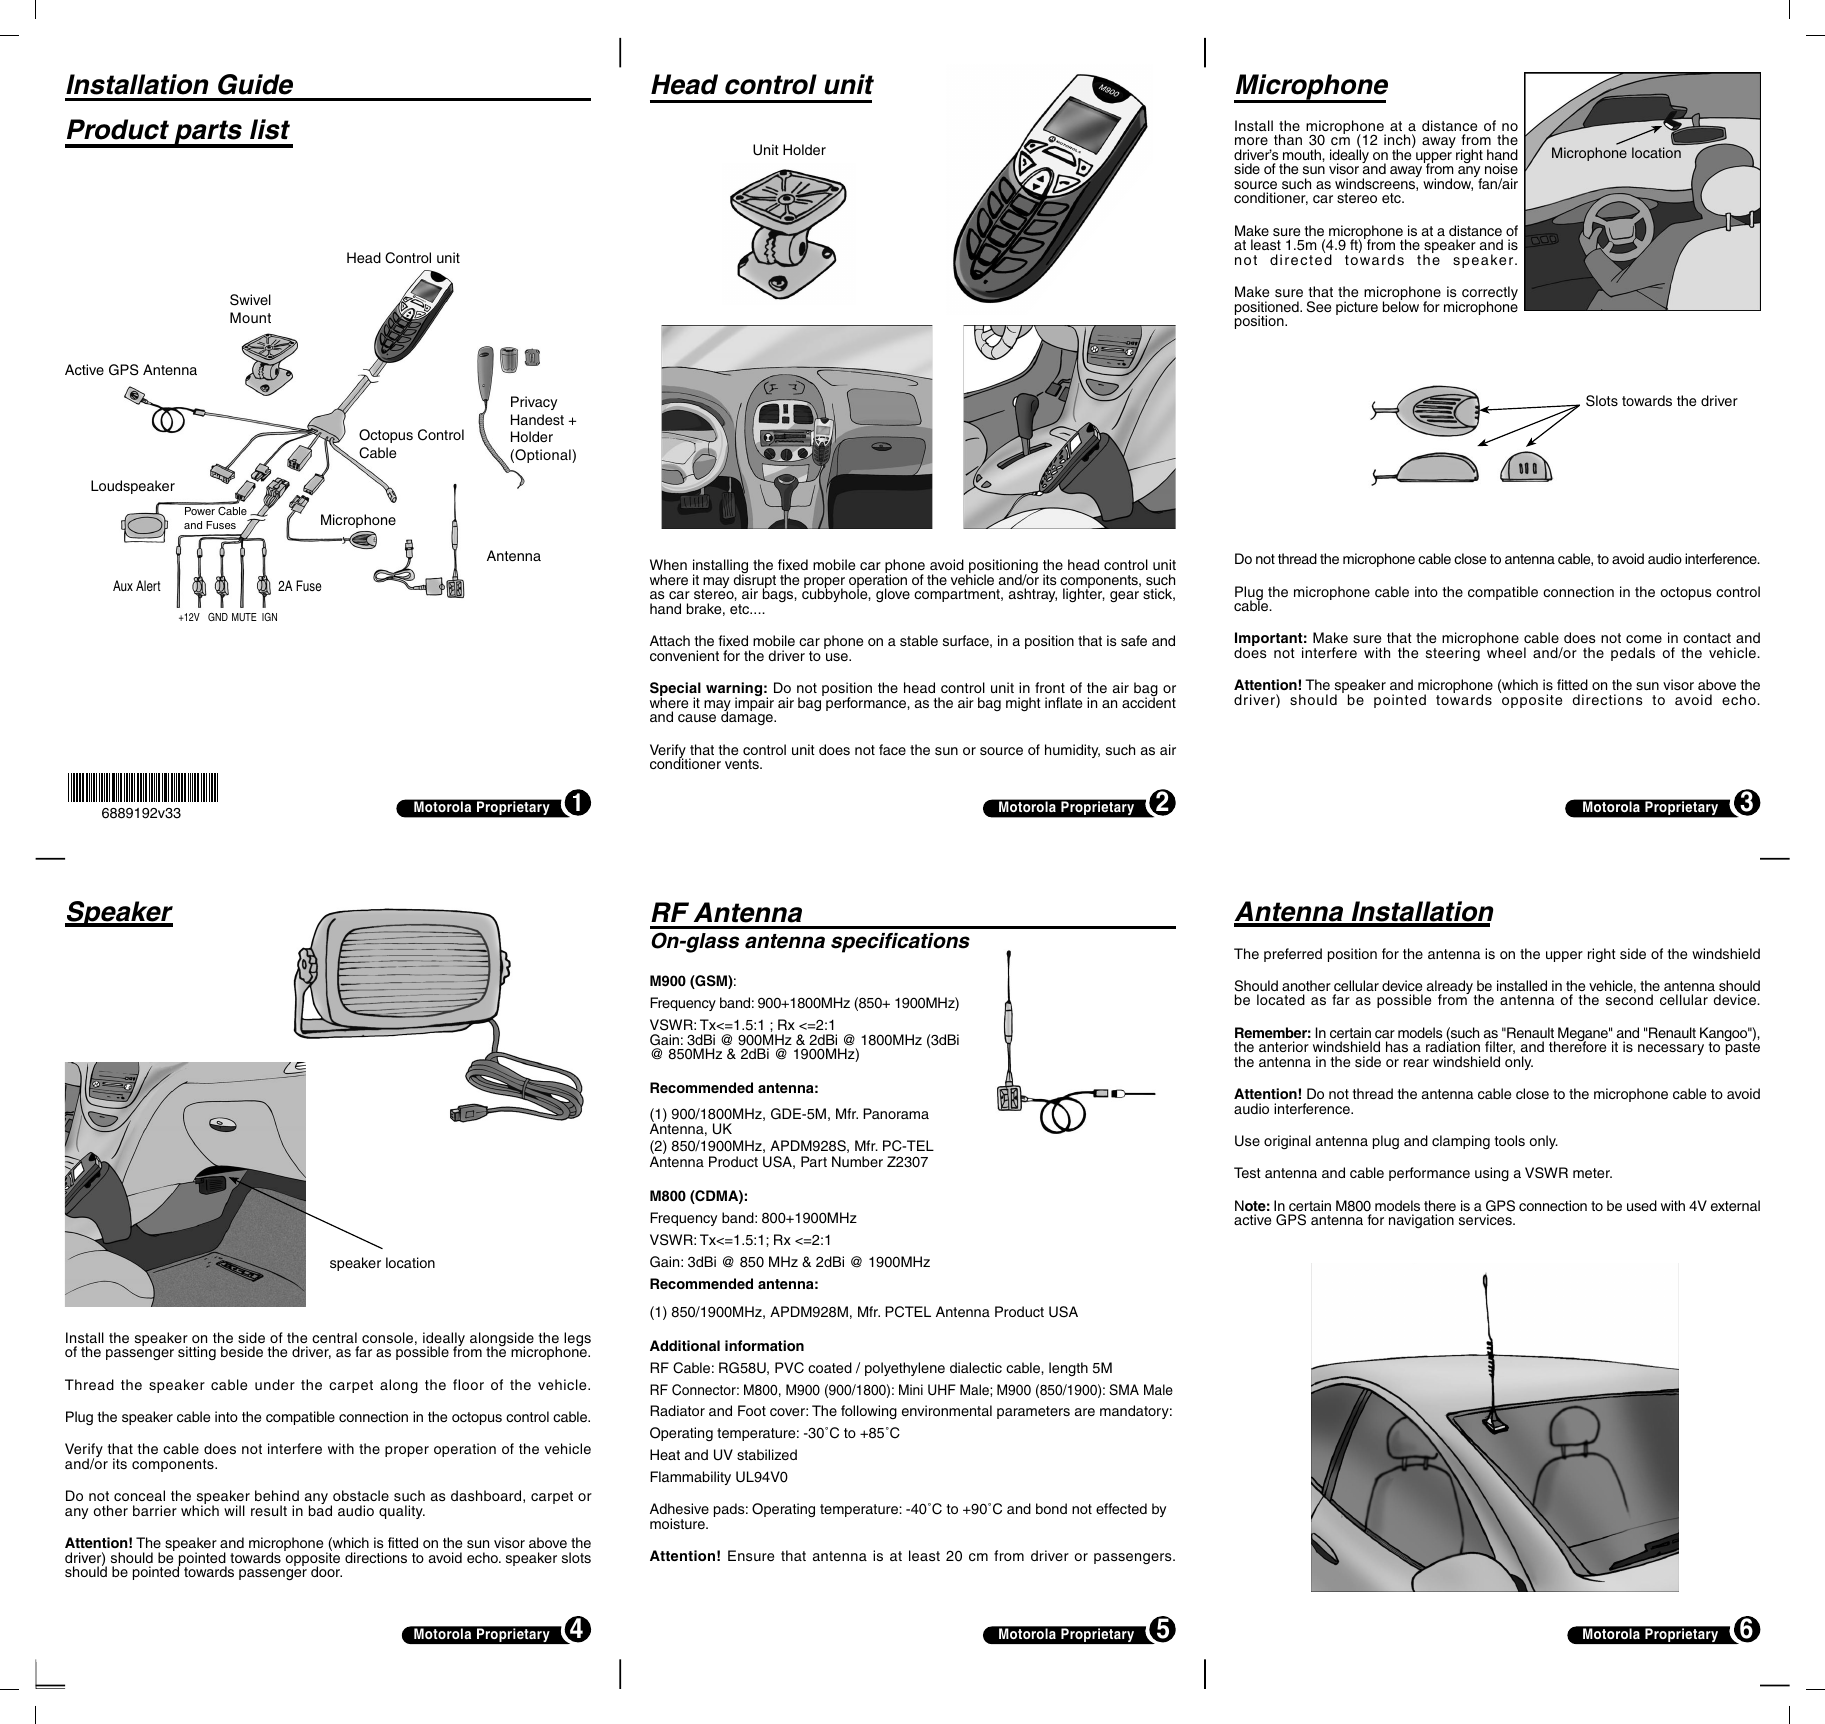 Page 1 of 2 - Installation_Guide_Eng_v33.fh9 Installation Guide Motorola-m900-car-phone-installation-guide